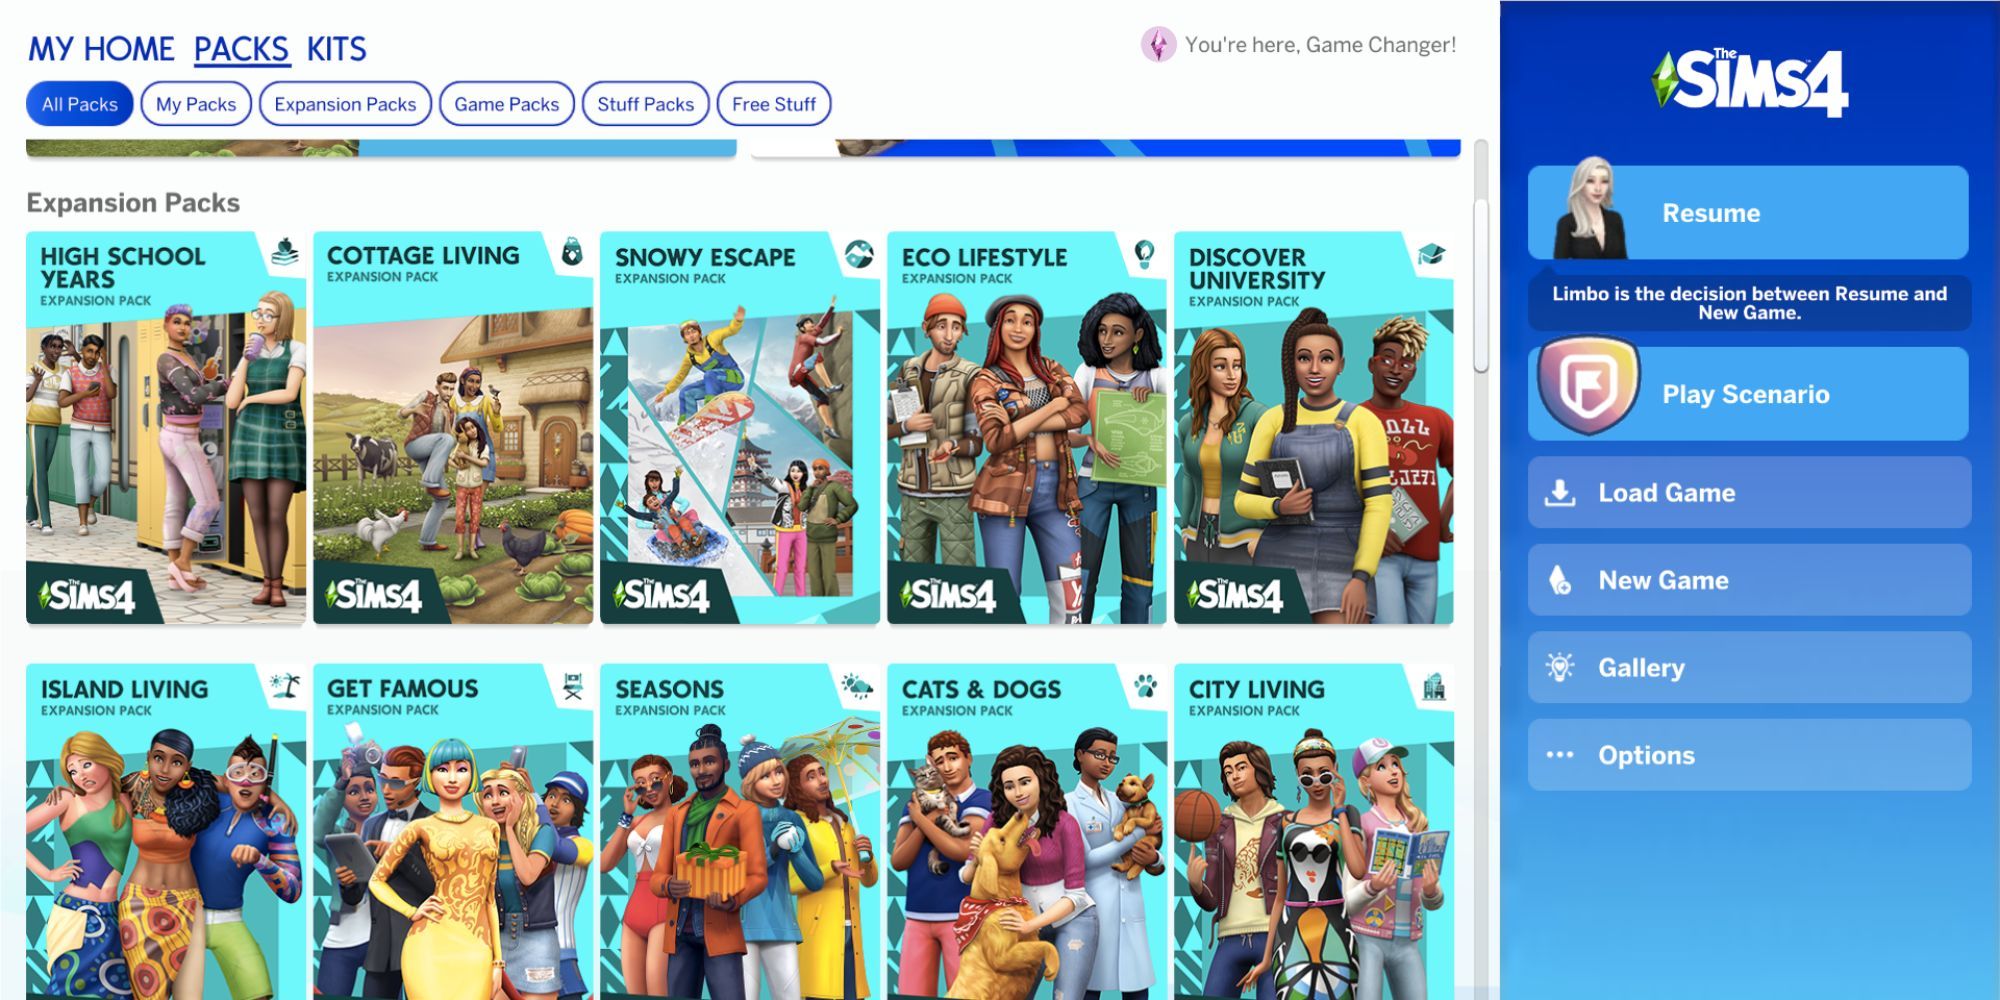 The Sims 4 Incheon Arrivals & Fashion Street Kits: Full List of CAS Items